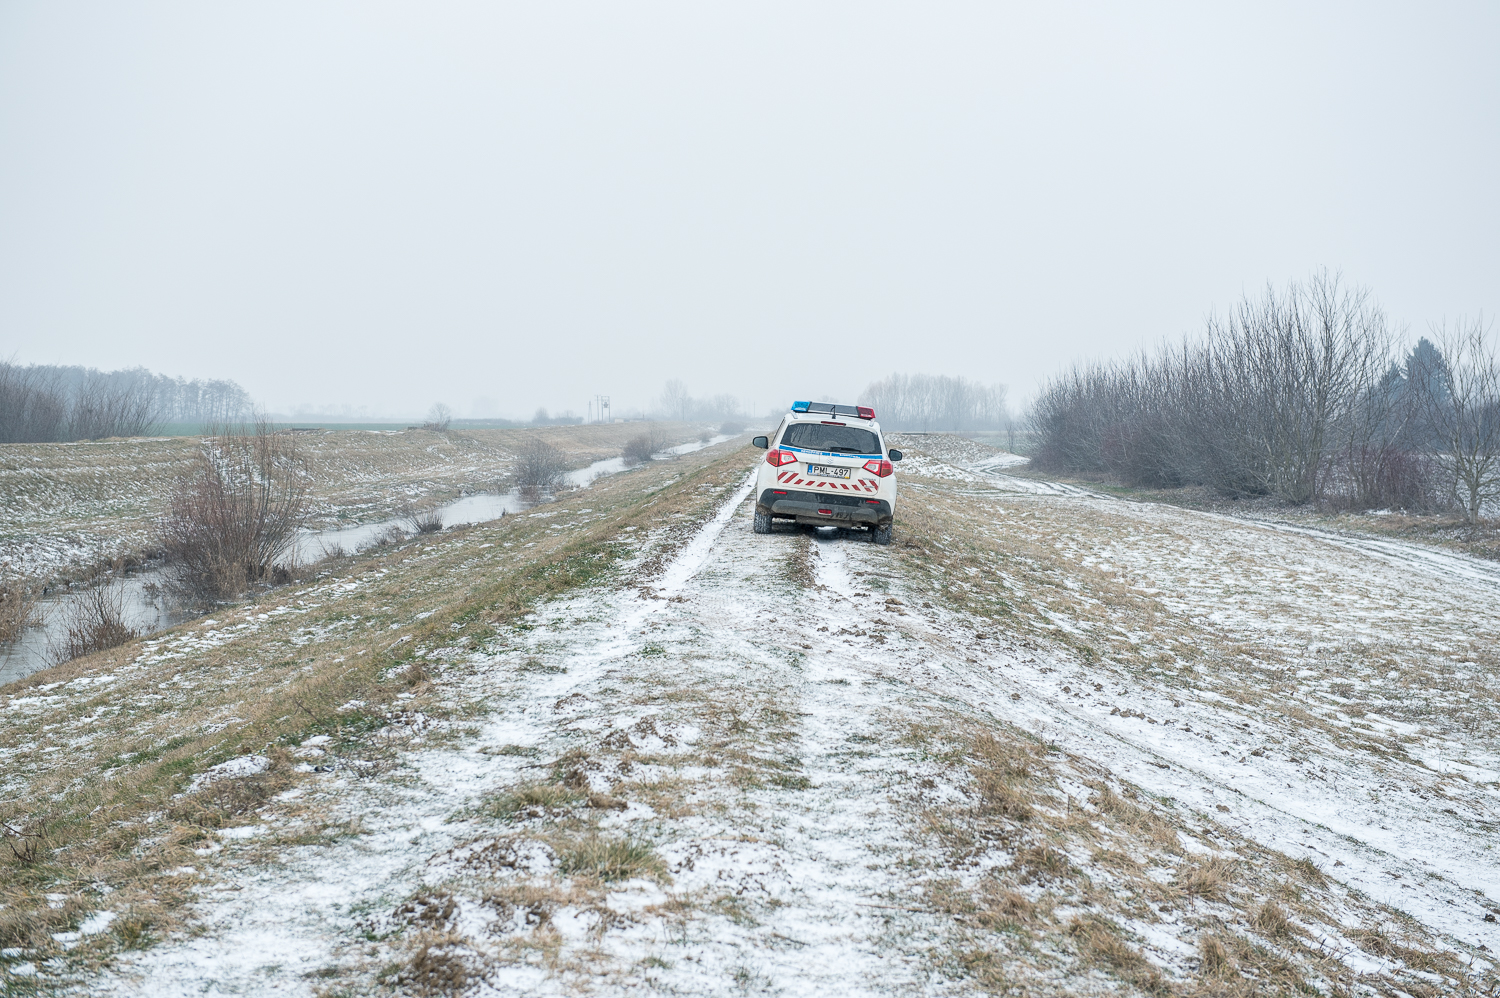  Police car stands on a dam near Illocska, Hungary 26 February 2018. The fence was constructed in the middle of the European migration crisis in 2015, with the aim to ensure border security by preventing immigrants from entering the country and the E